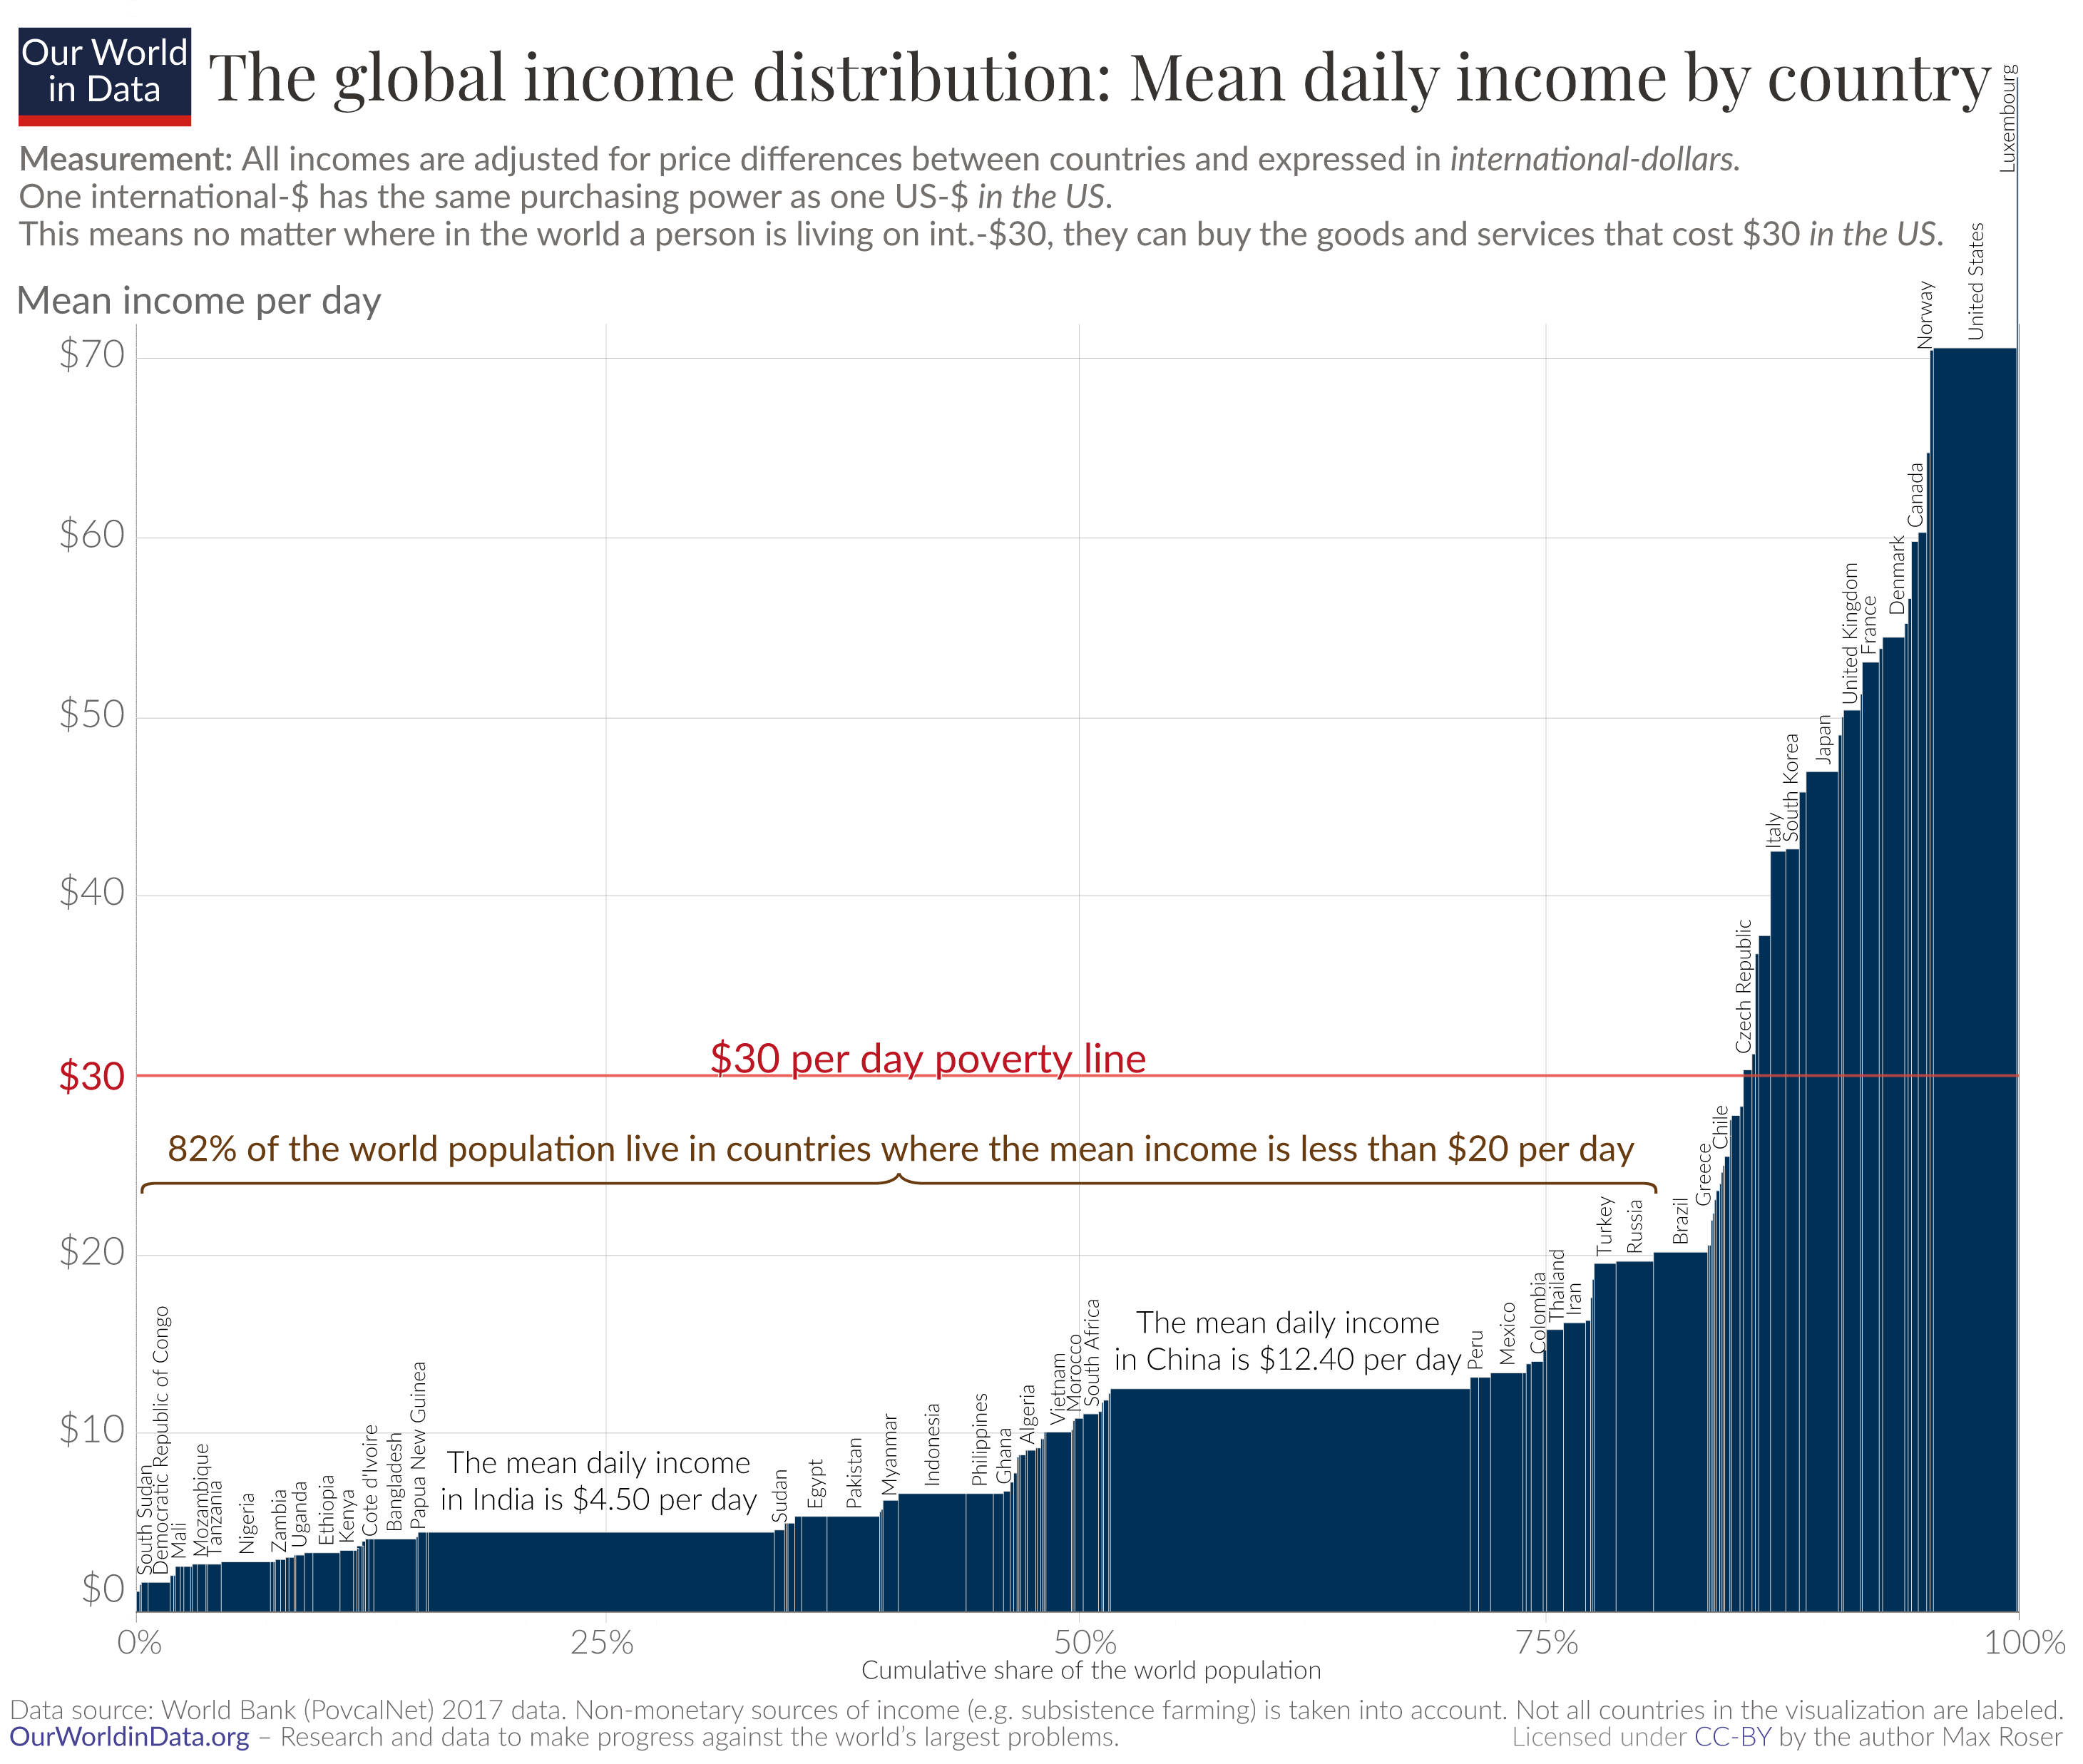 Mean income by country